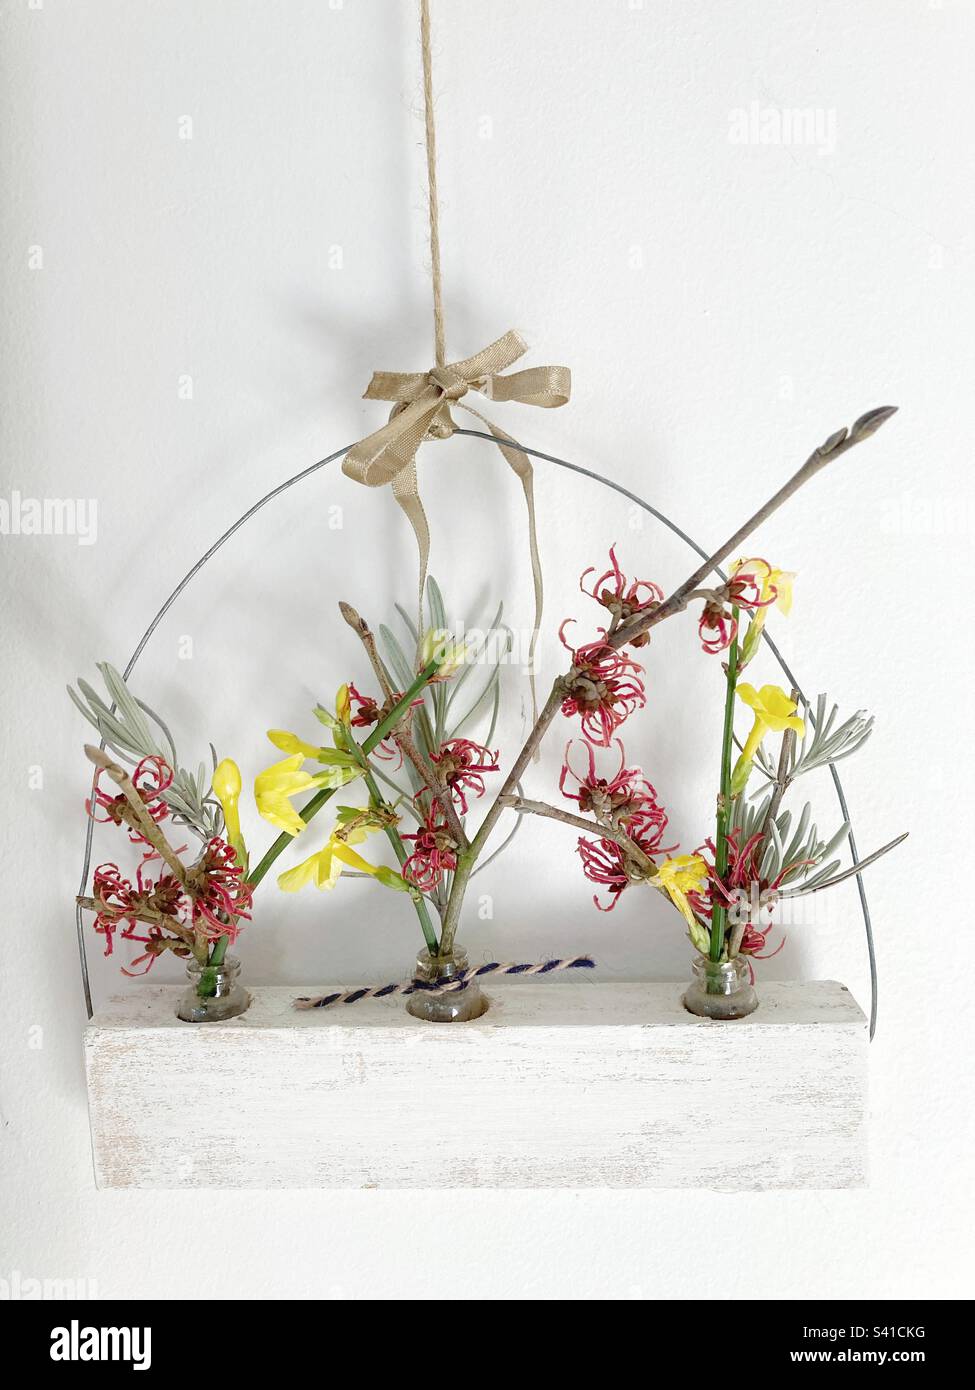 Winter blossoms in three small vases hanging on a wall Stock Photo